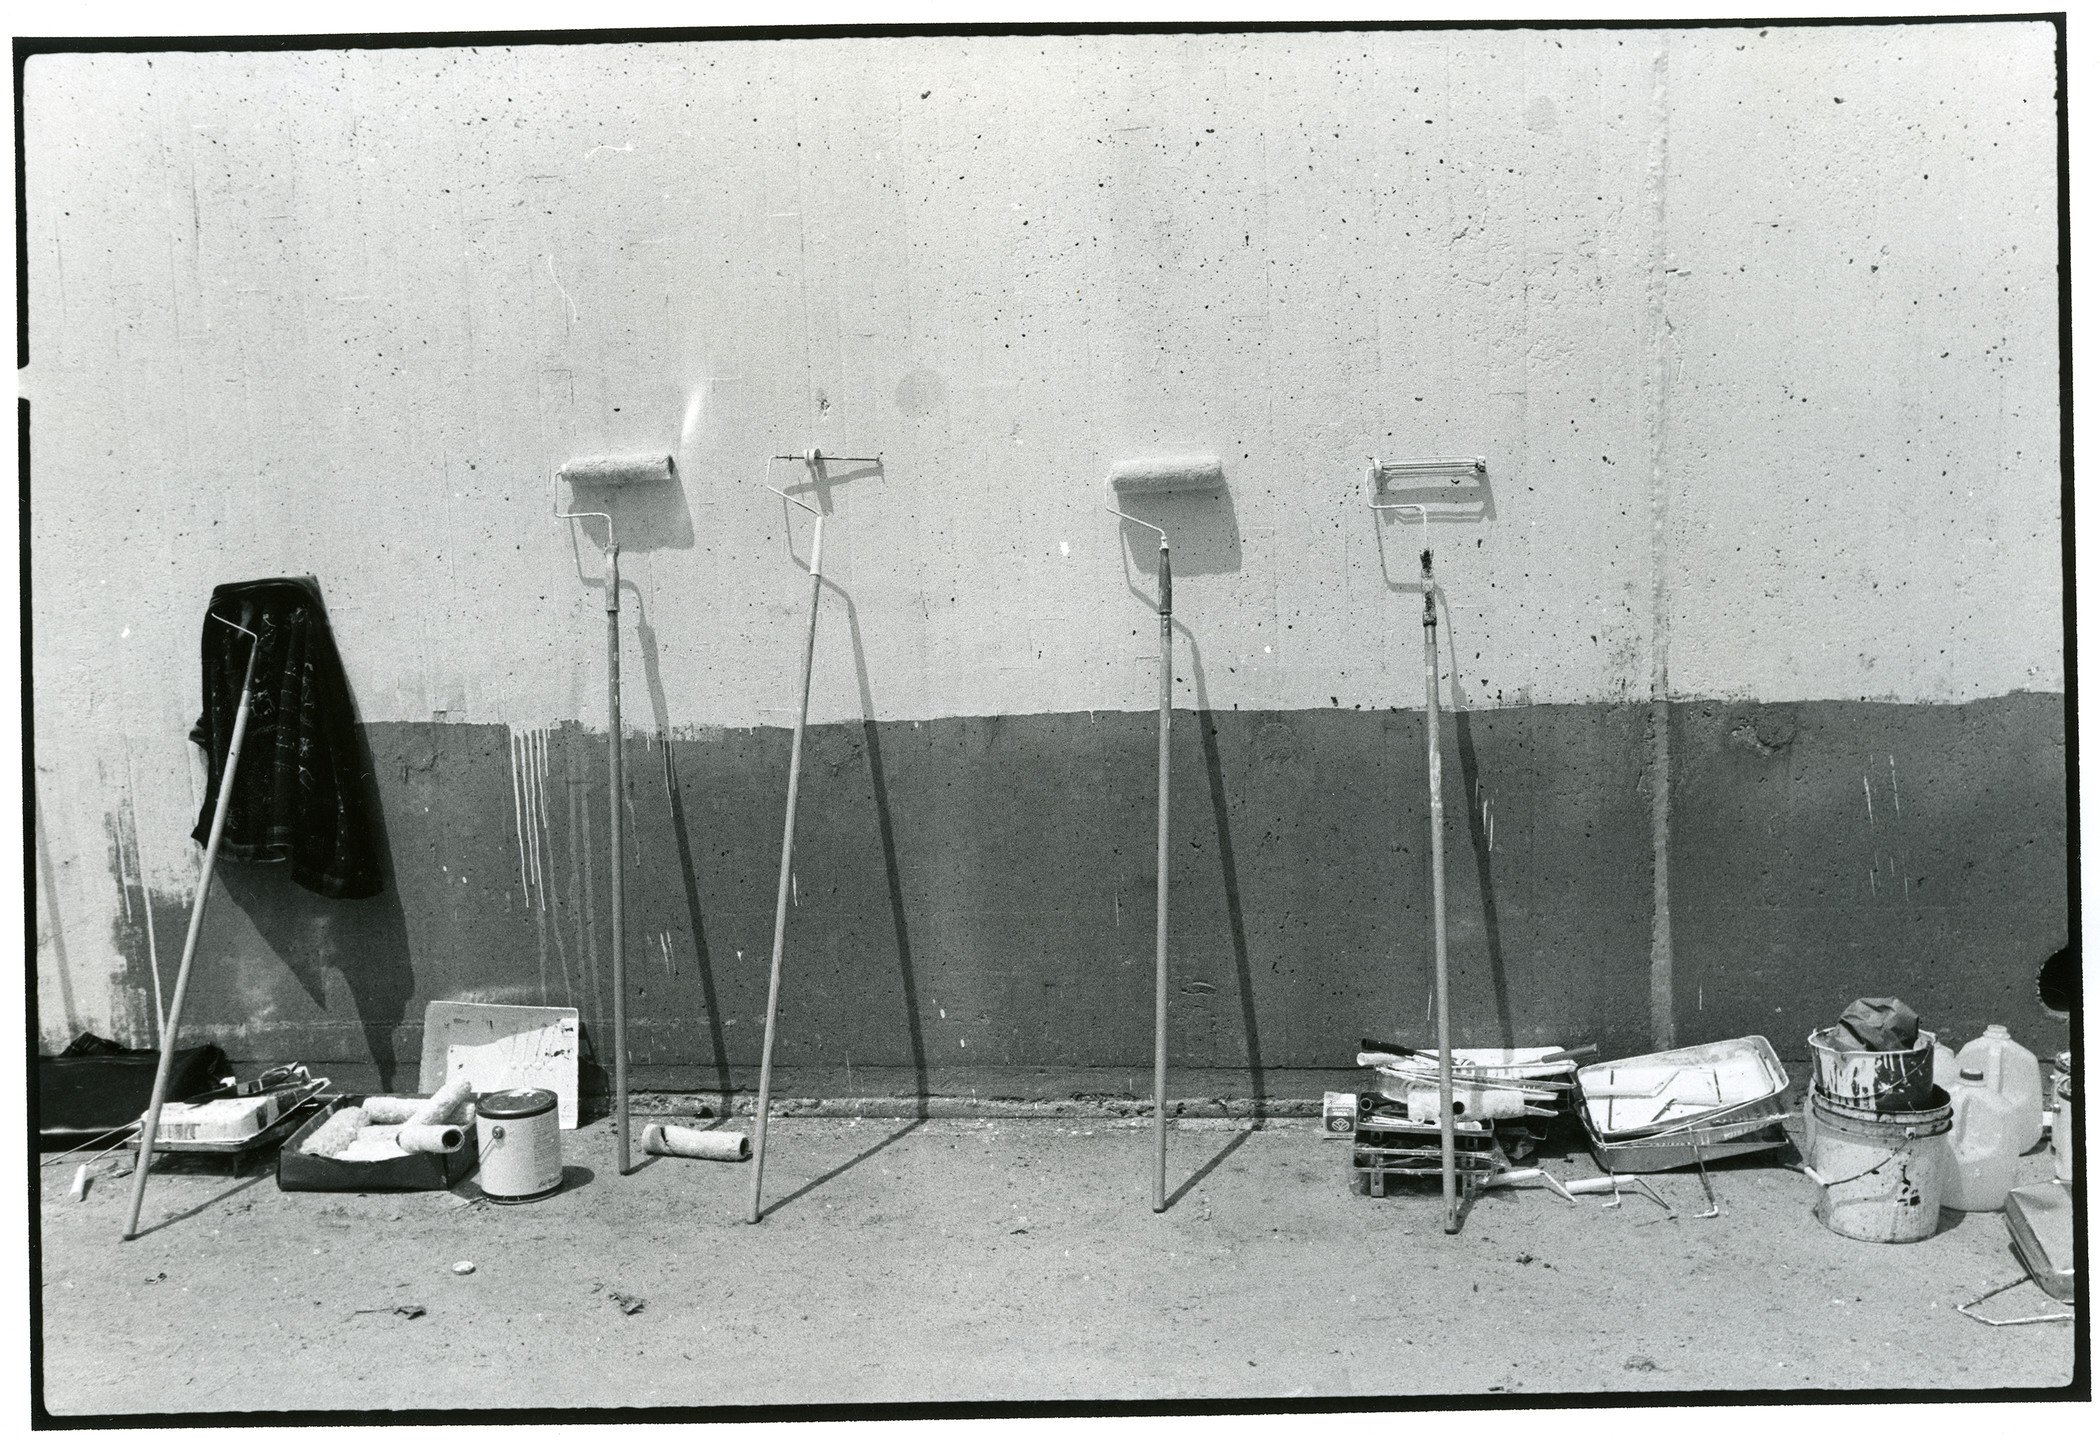  Paint Rollers at  The Great Wall of Los Angeles ,&nbsp;© SPARC 1981, courtesy of Judith F. Baca and the SPARC archives. Photo: Linda Eber, 1981   